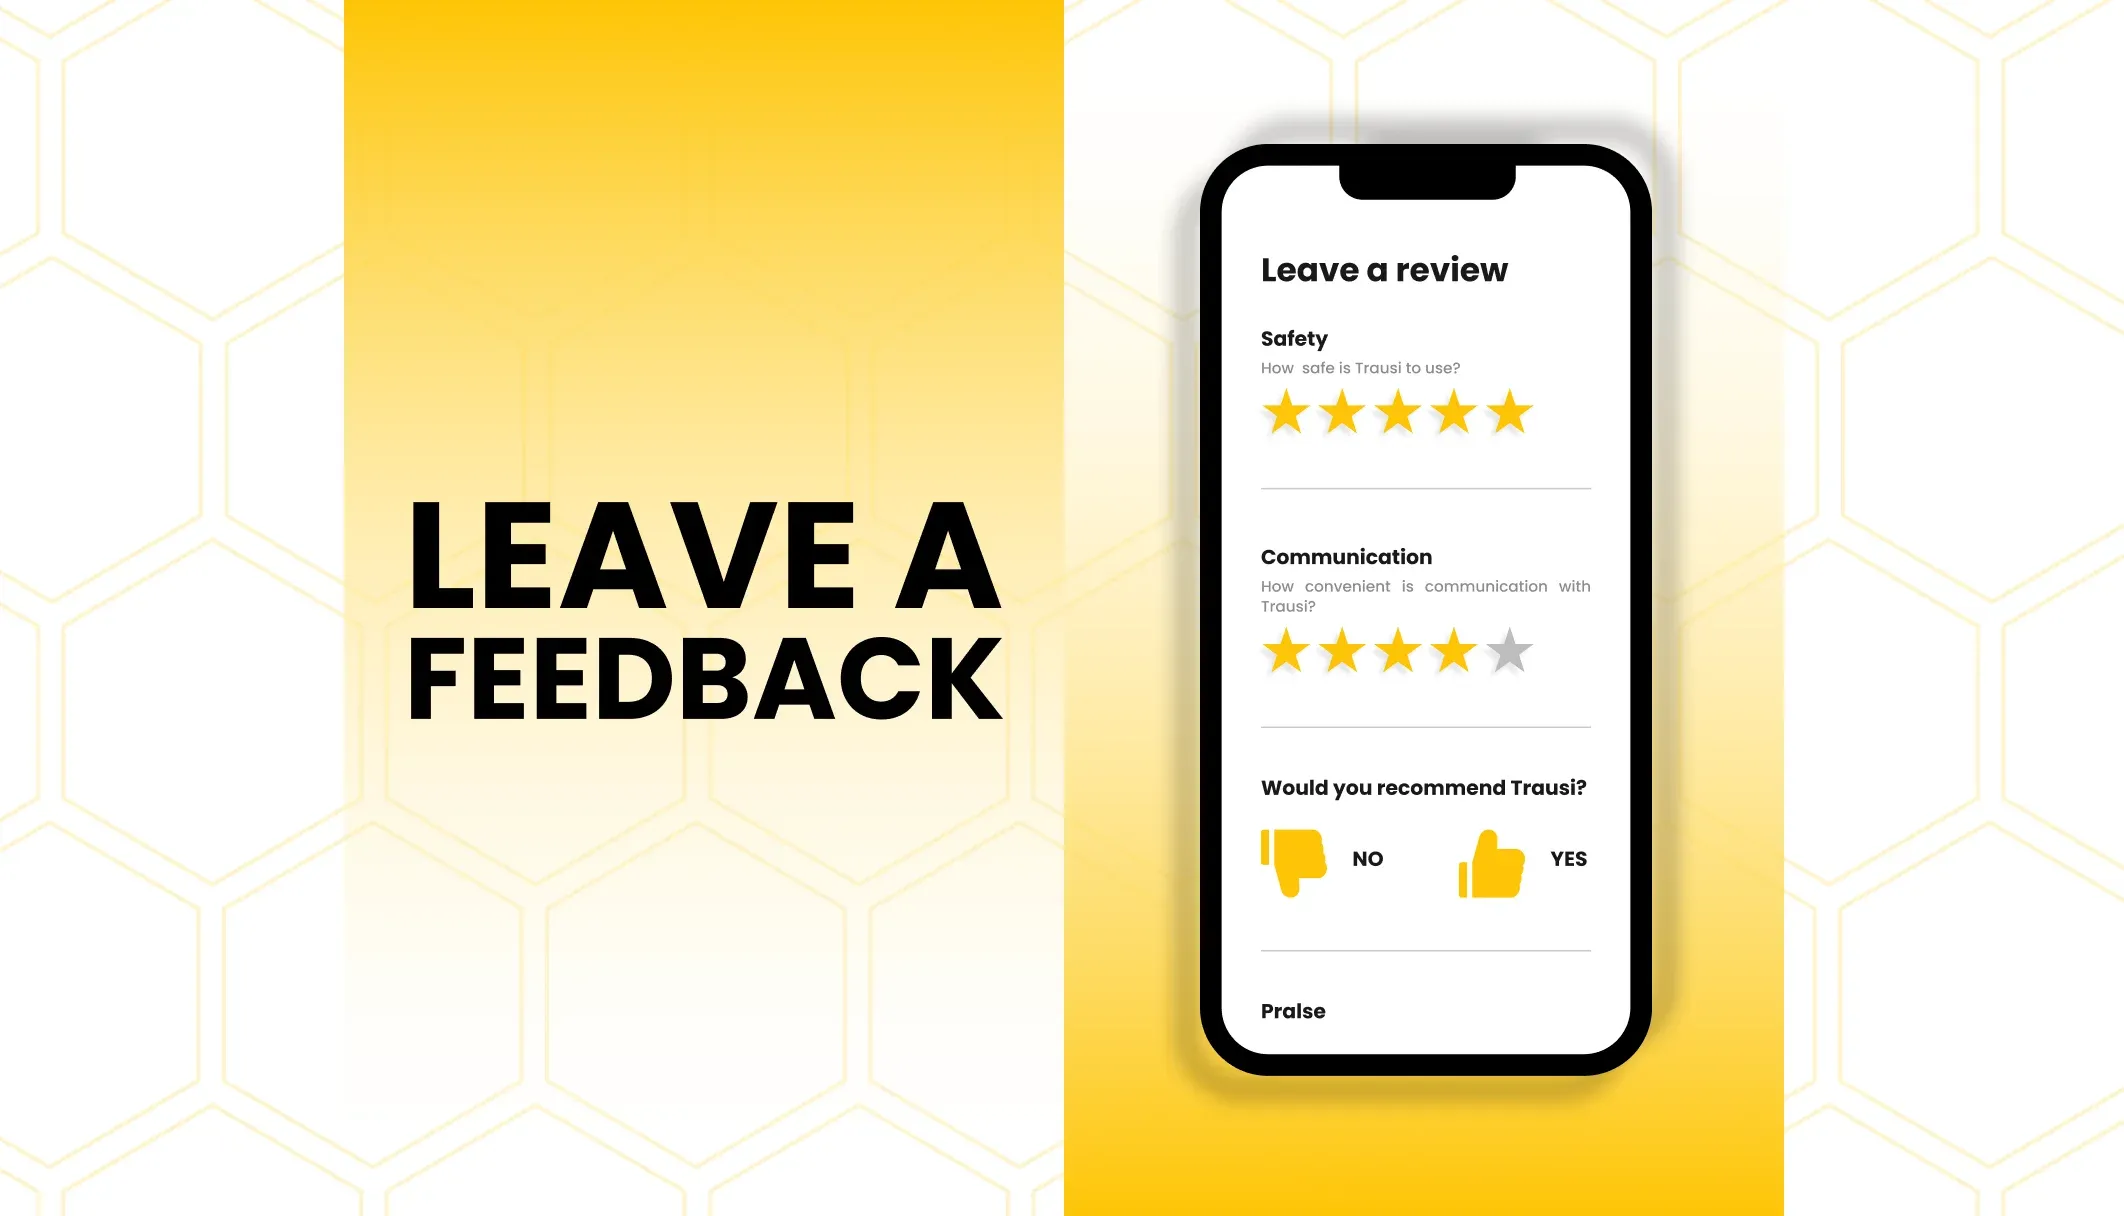 leave a feedback feature